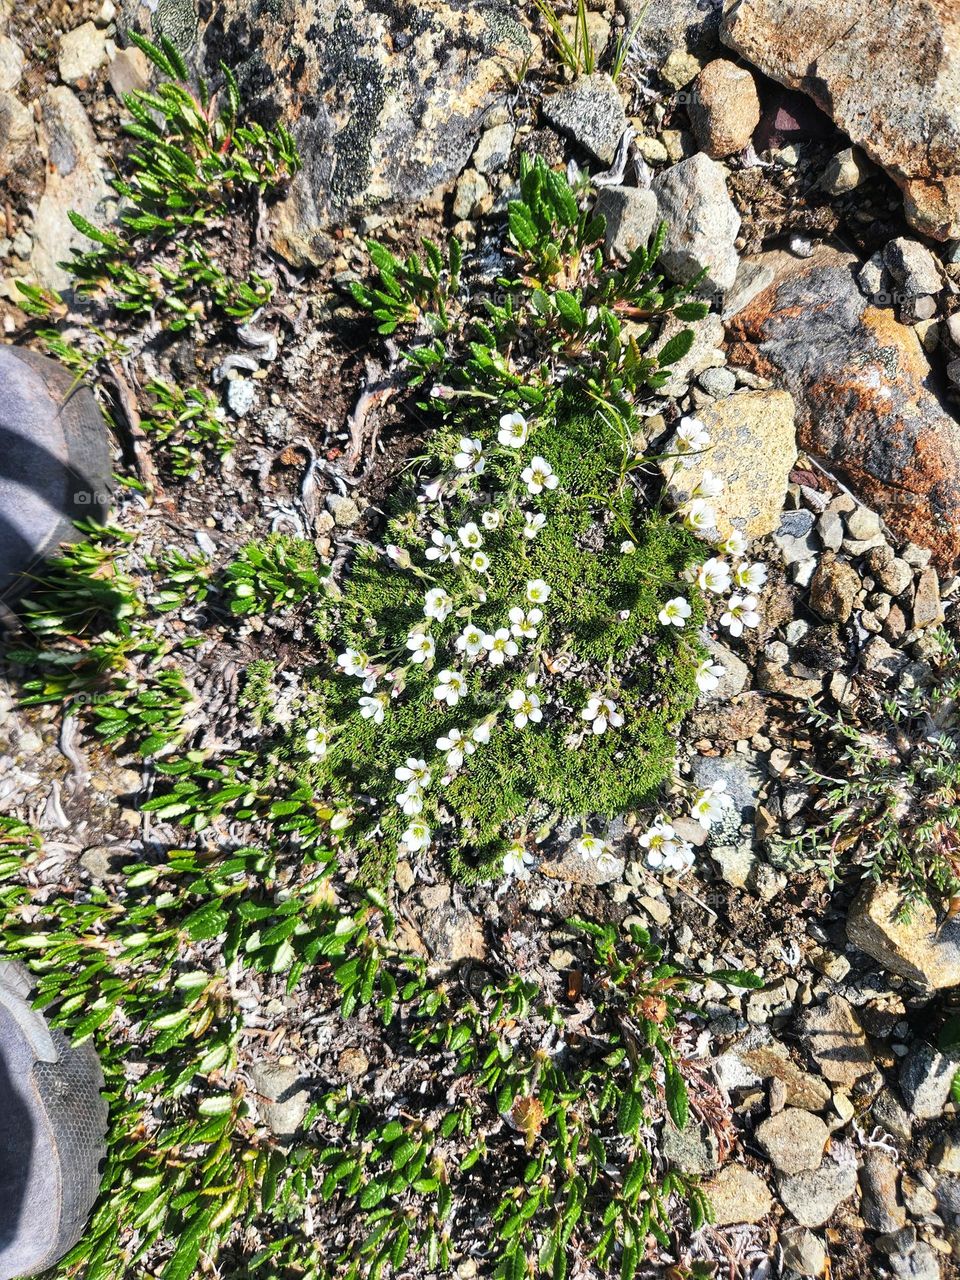 White flowers with yellow middles growing in the Canadian North